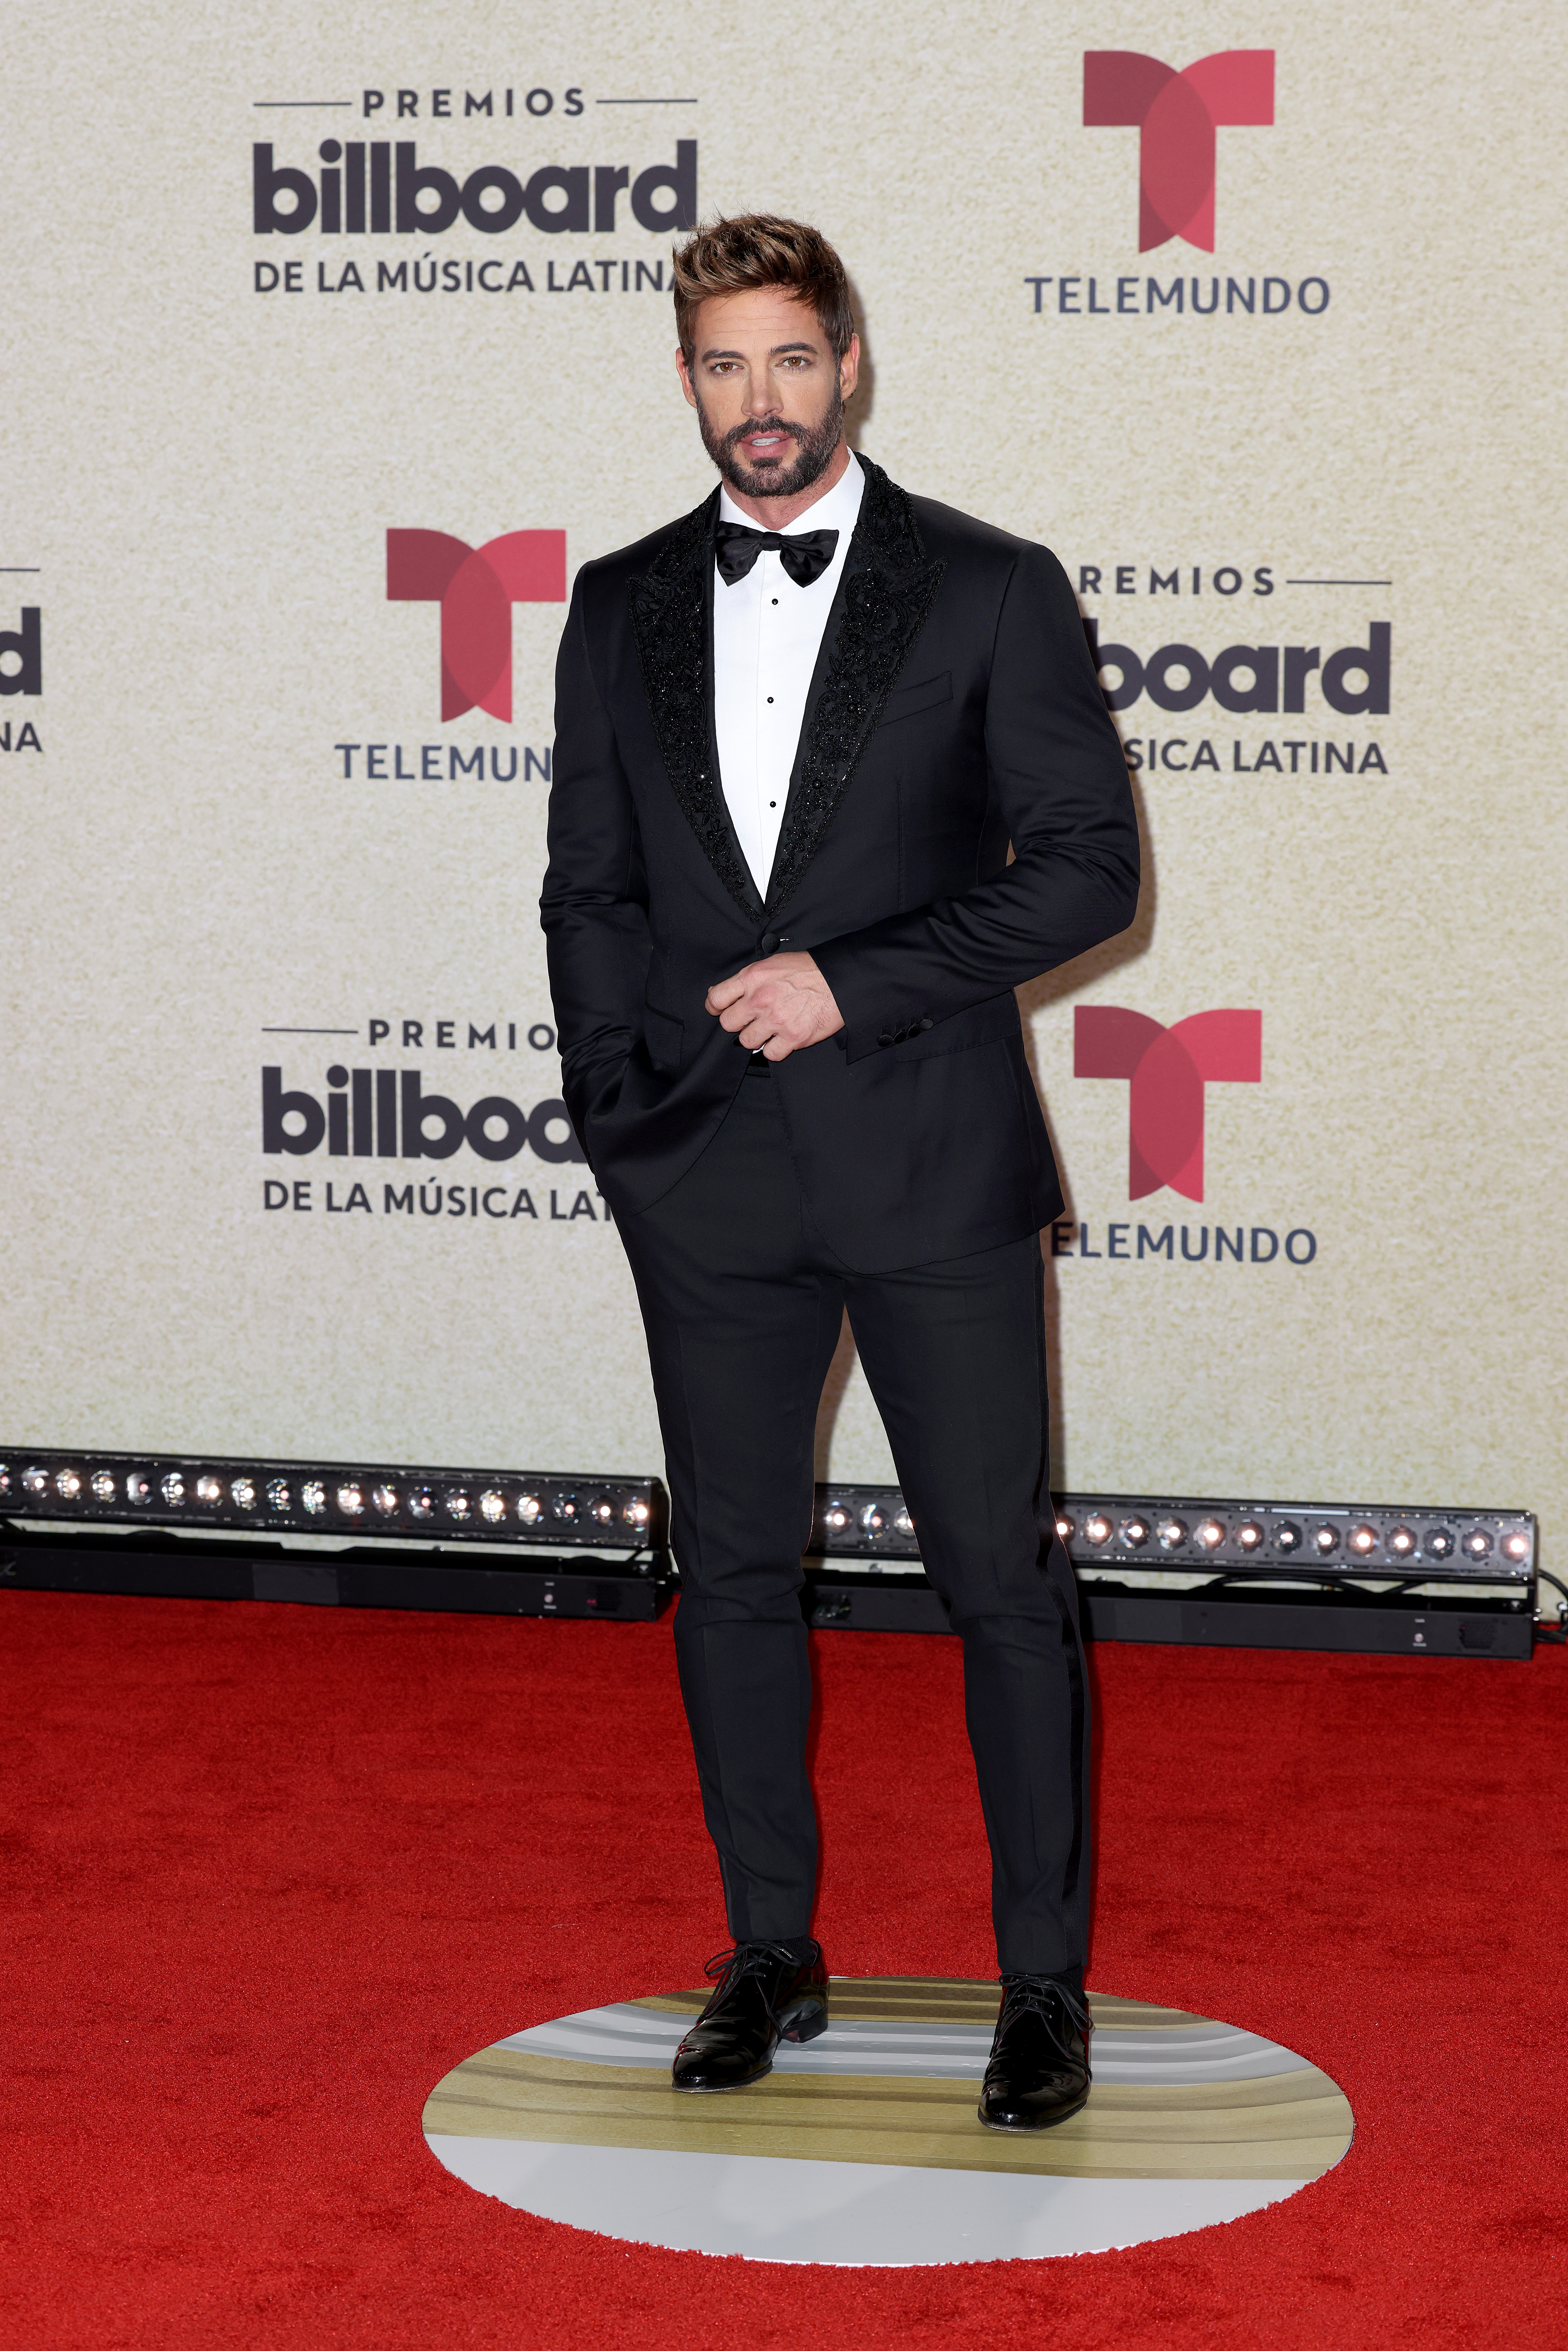 William Levy at the 2021 Billboard Awards.